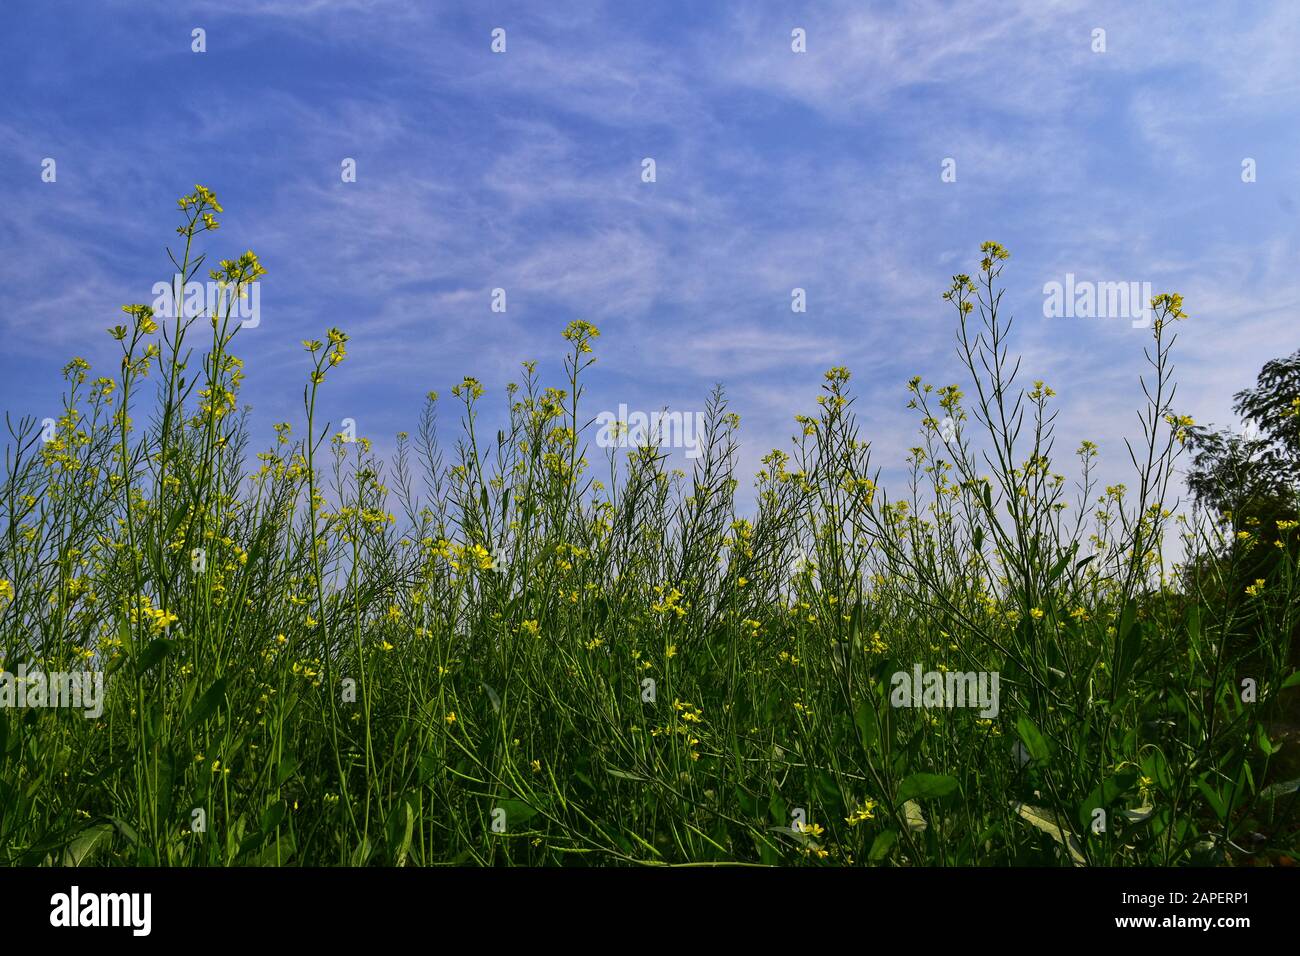 The mustard is a plant species in the genera Brassica. The group of little blurred yellow flowers of mustard with blue sky. Stock Photo